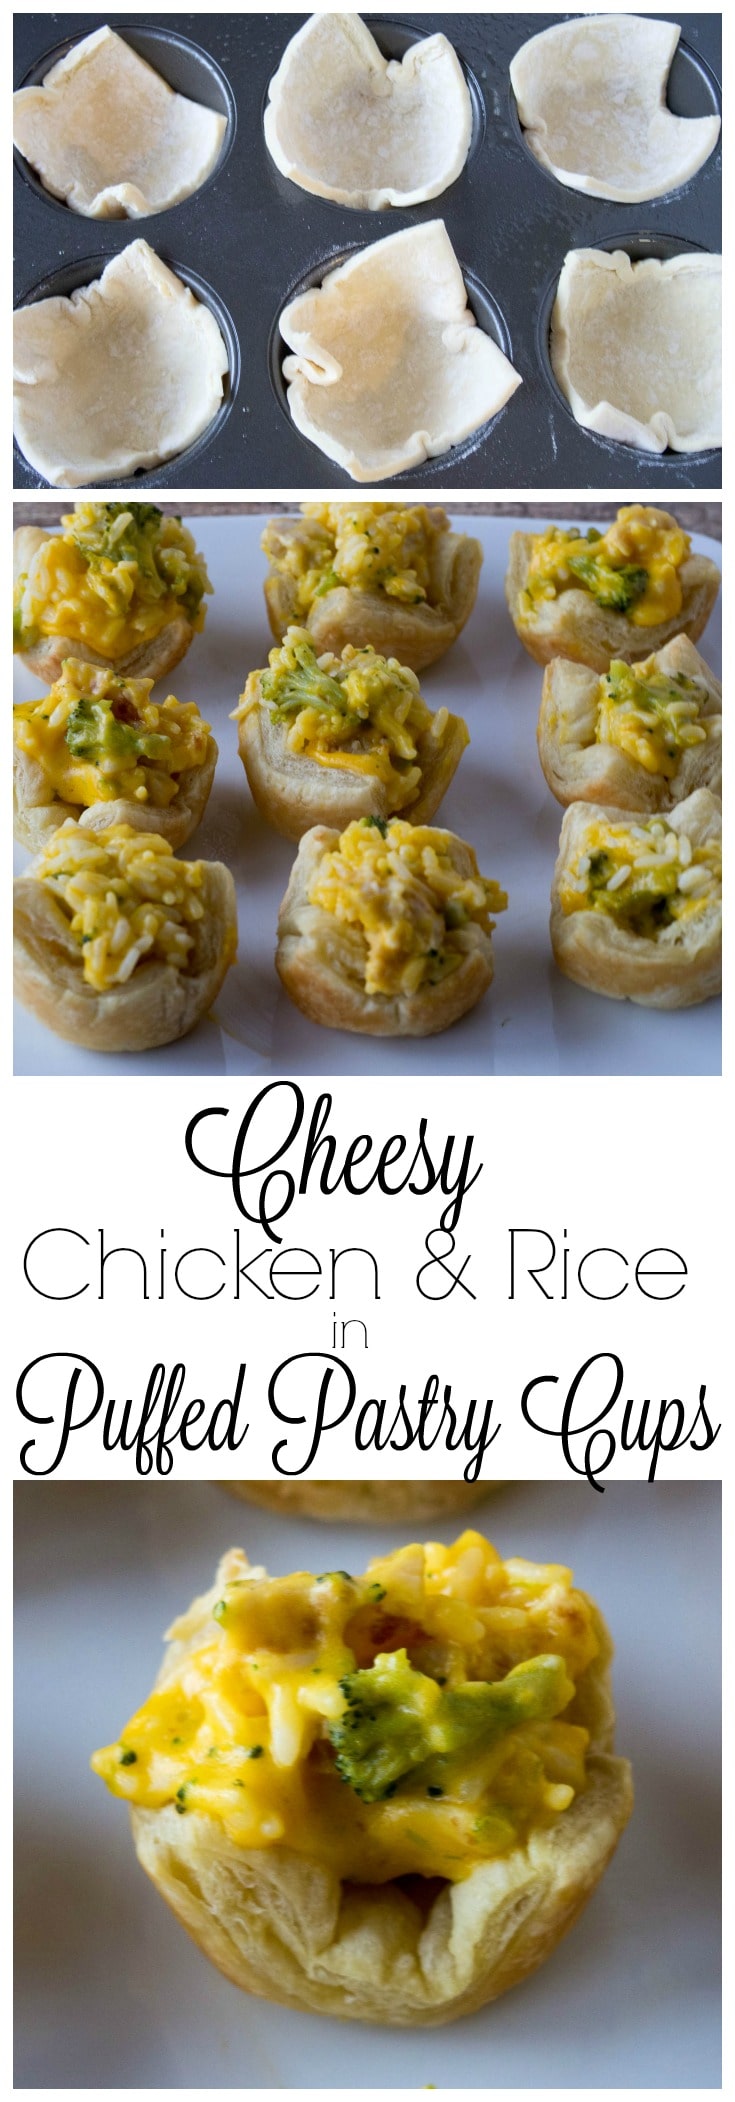 Cheesy Chicken and Rice in Puffed Pastry Cups - an easy family dinner or quick appetizer